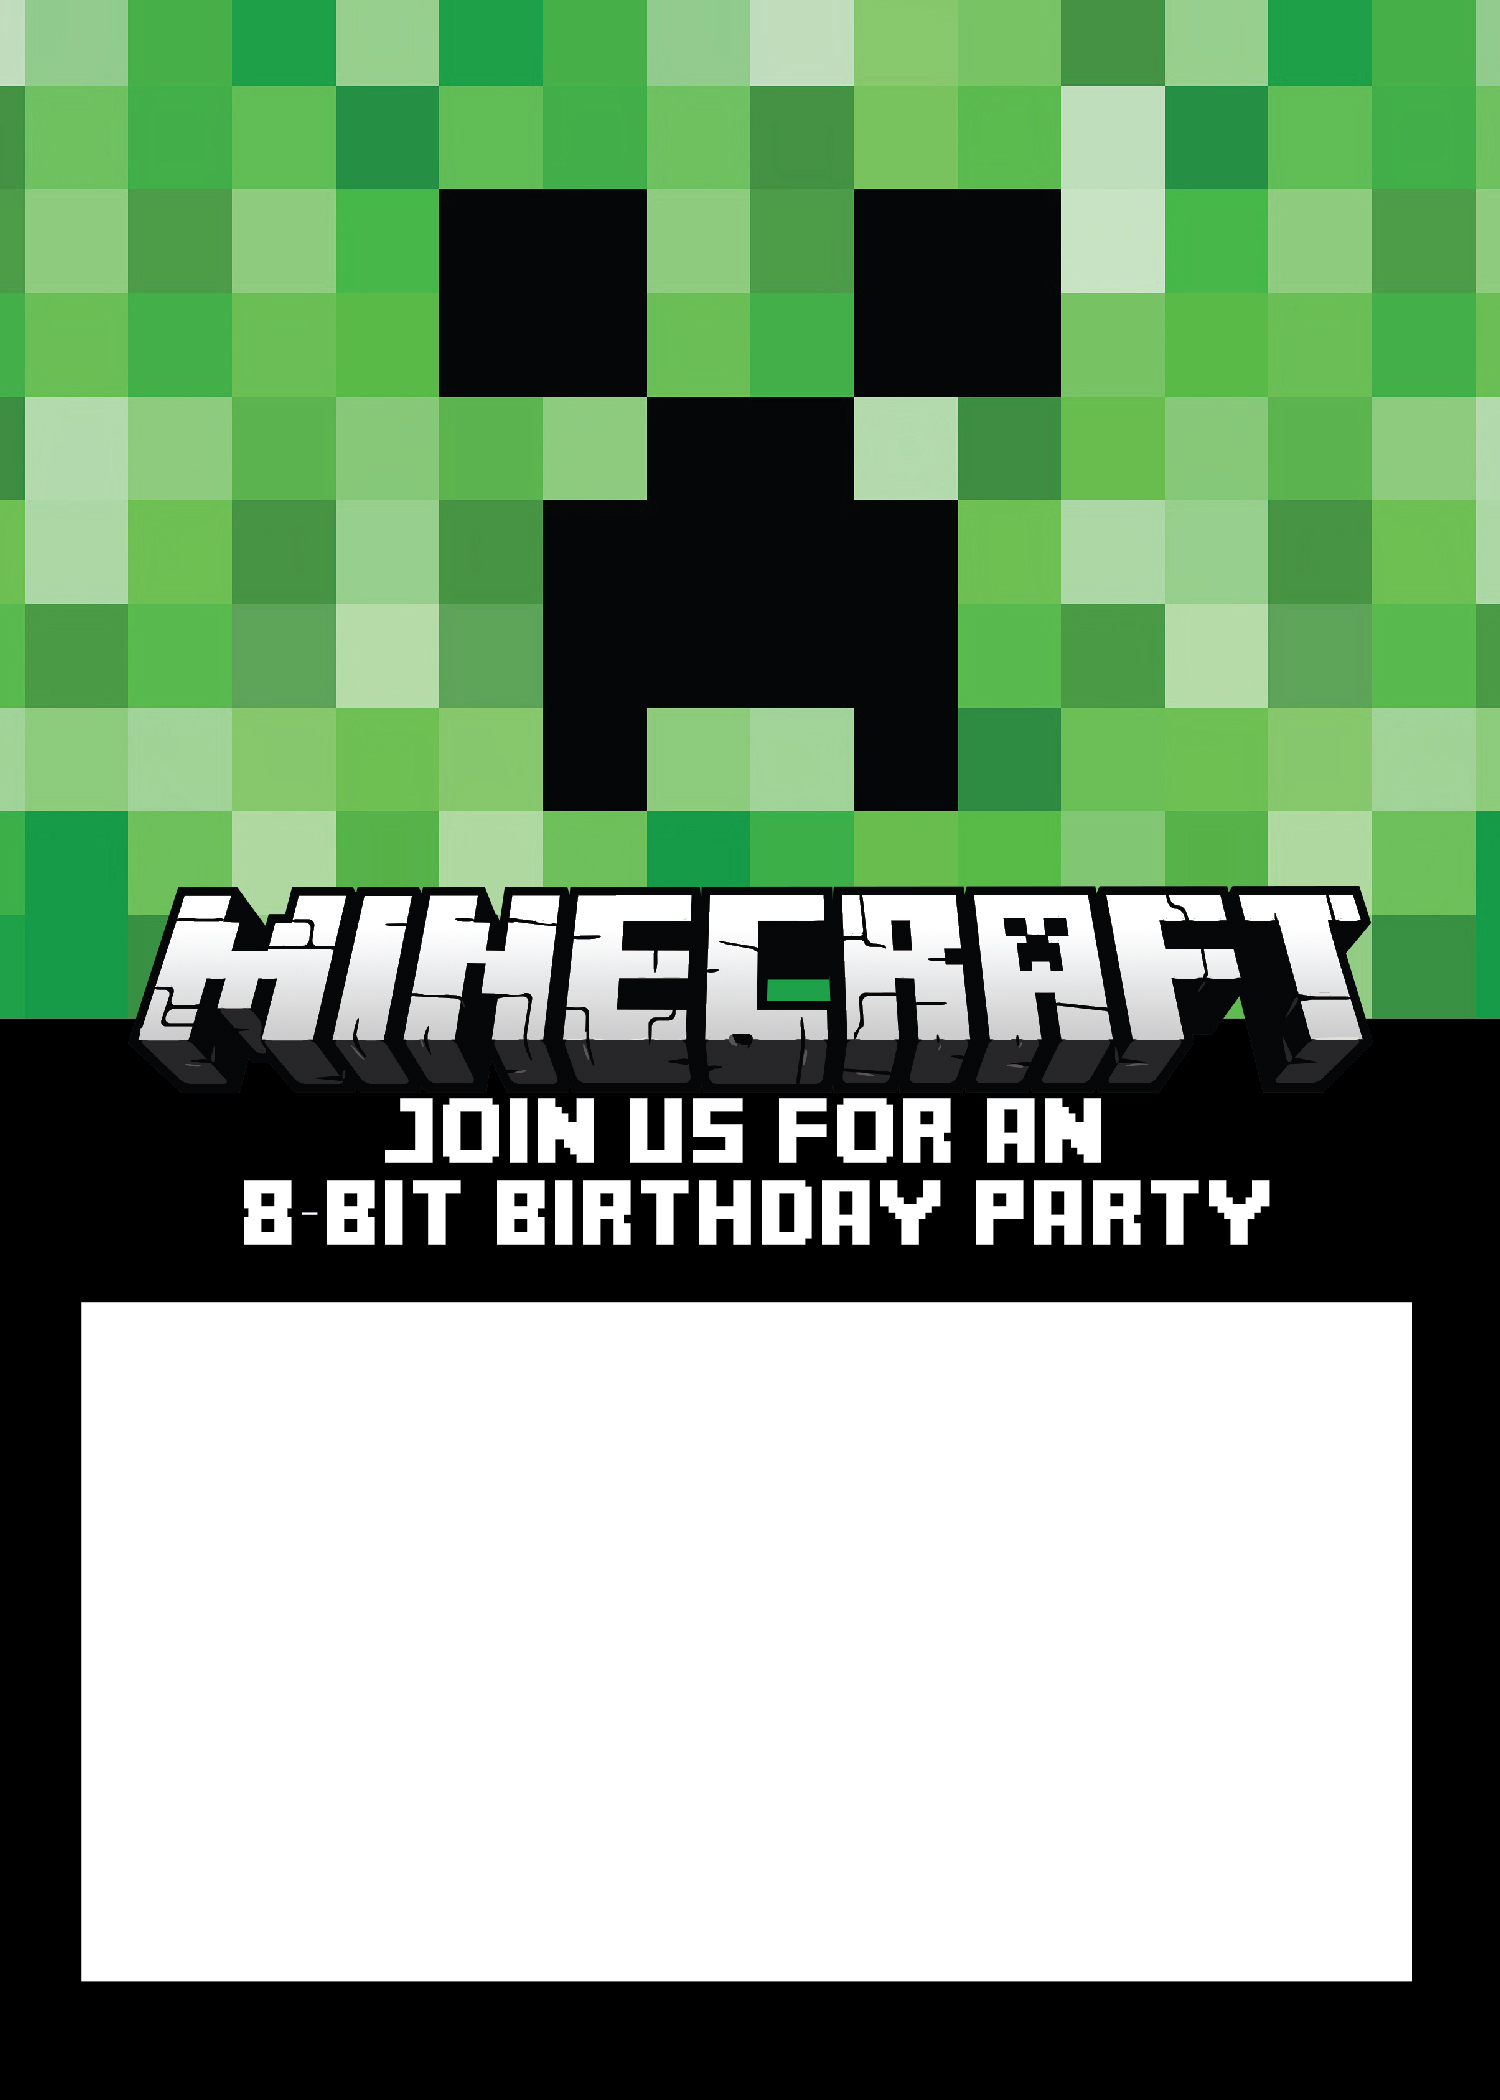 Free Printable Online Invitations Invitation Card Maker Within Minecraft Birthday Card Template